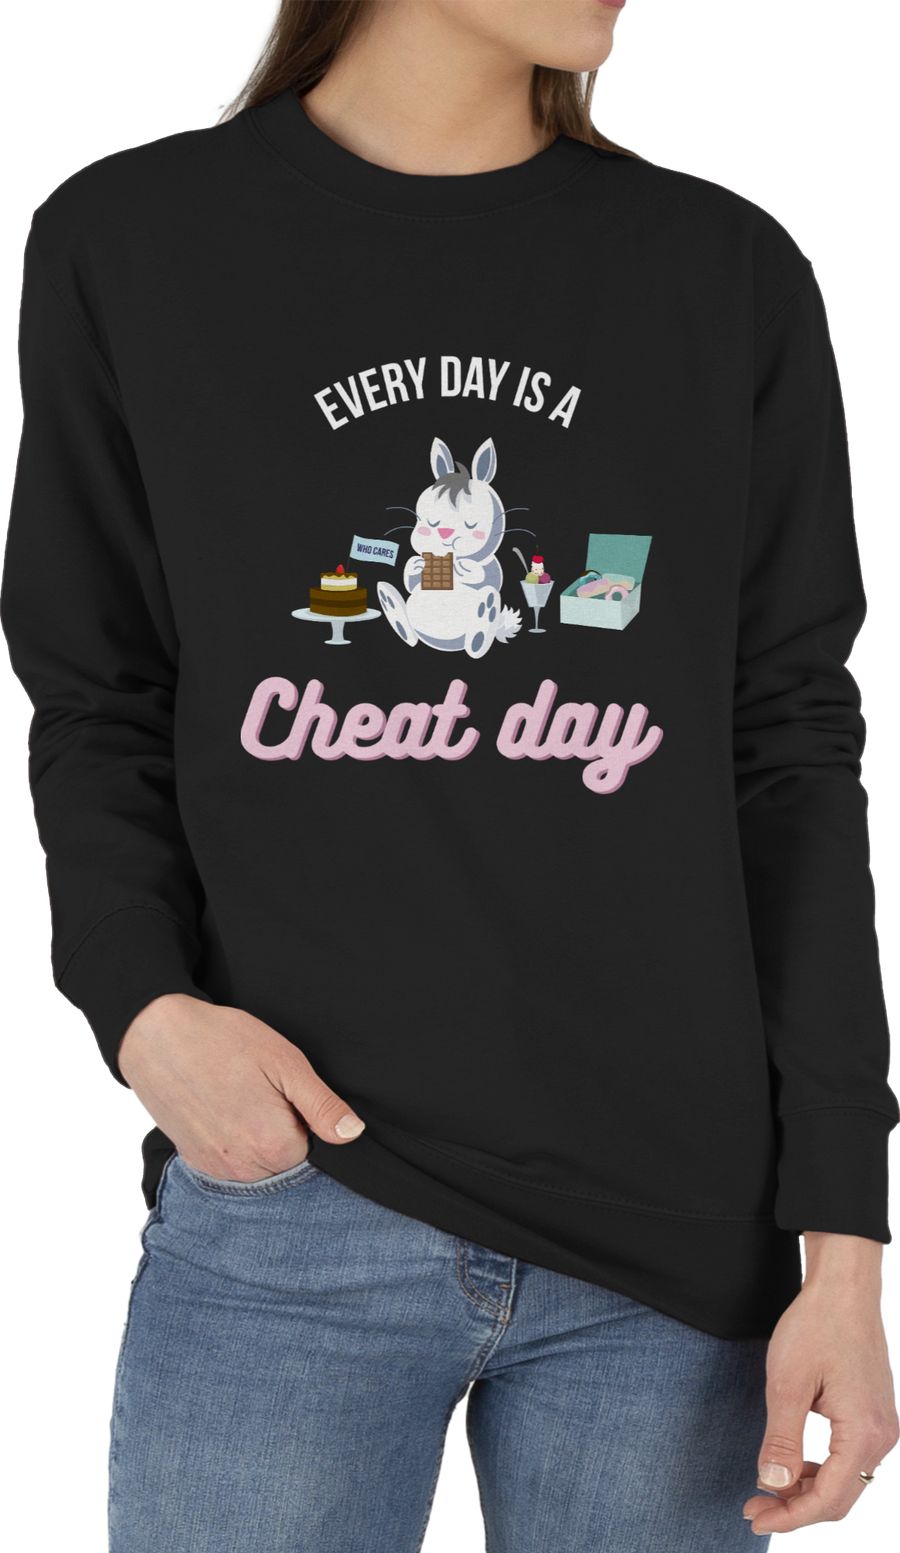 Every Day is a Cheatday